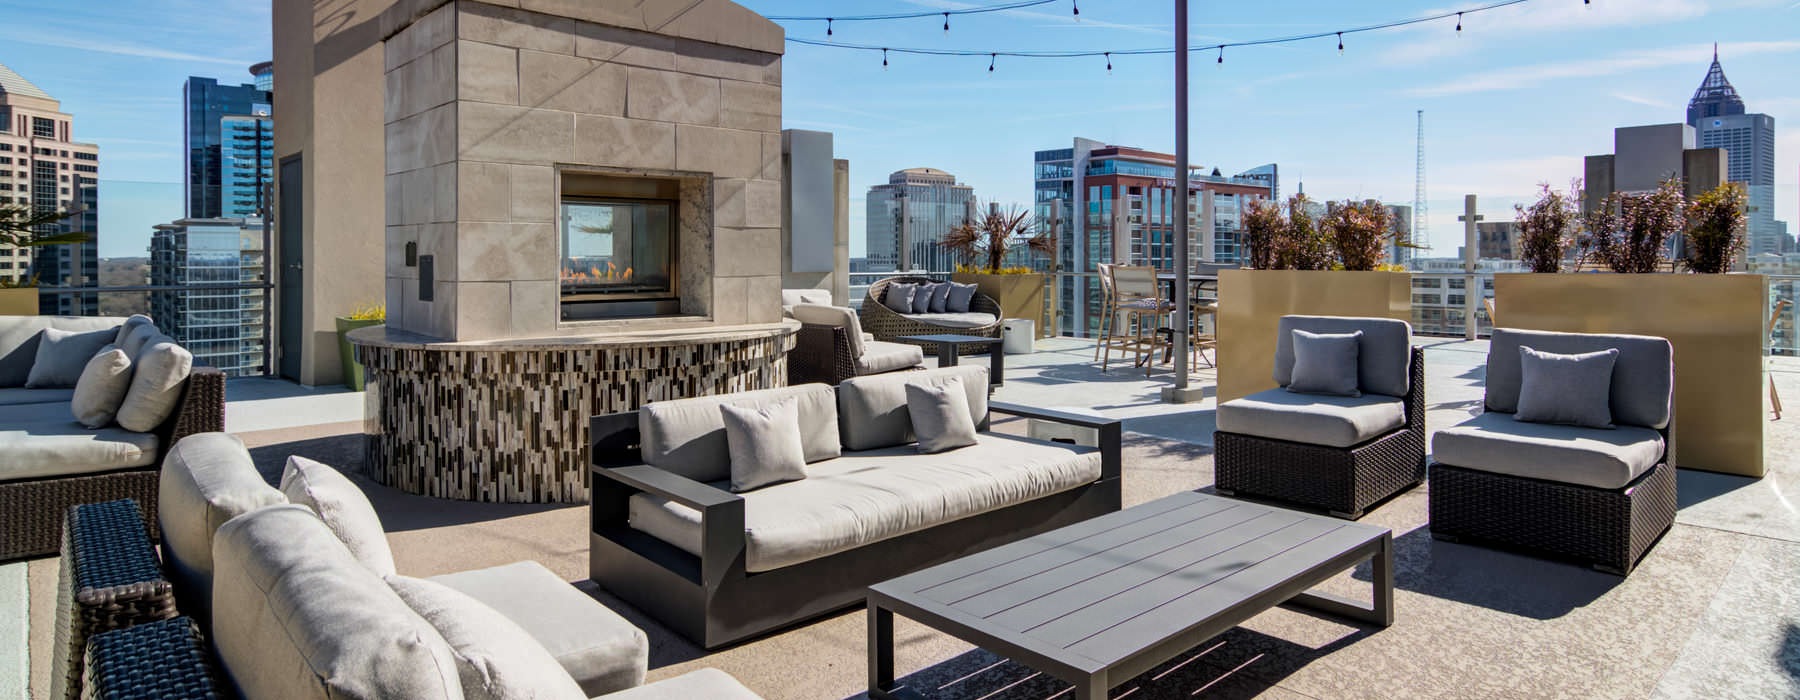 rooftop terrace with seating